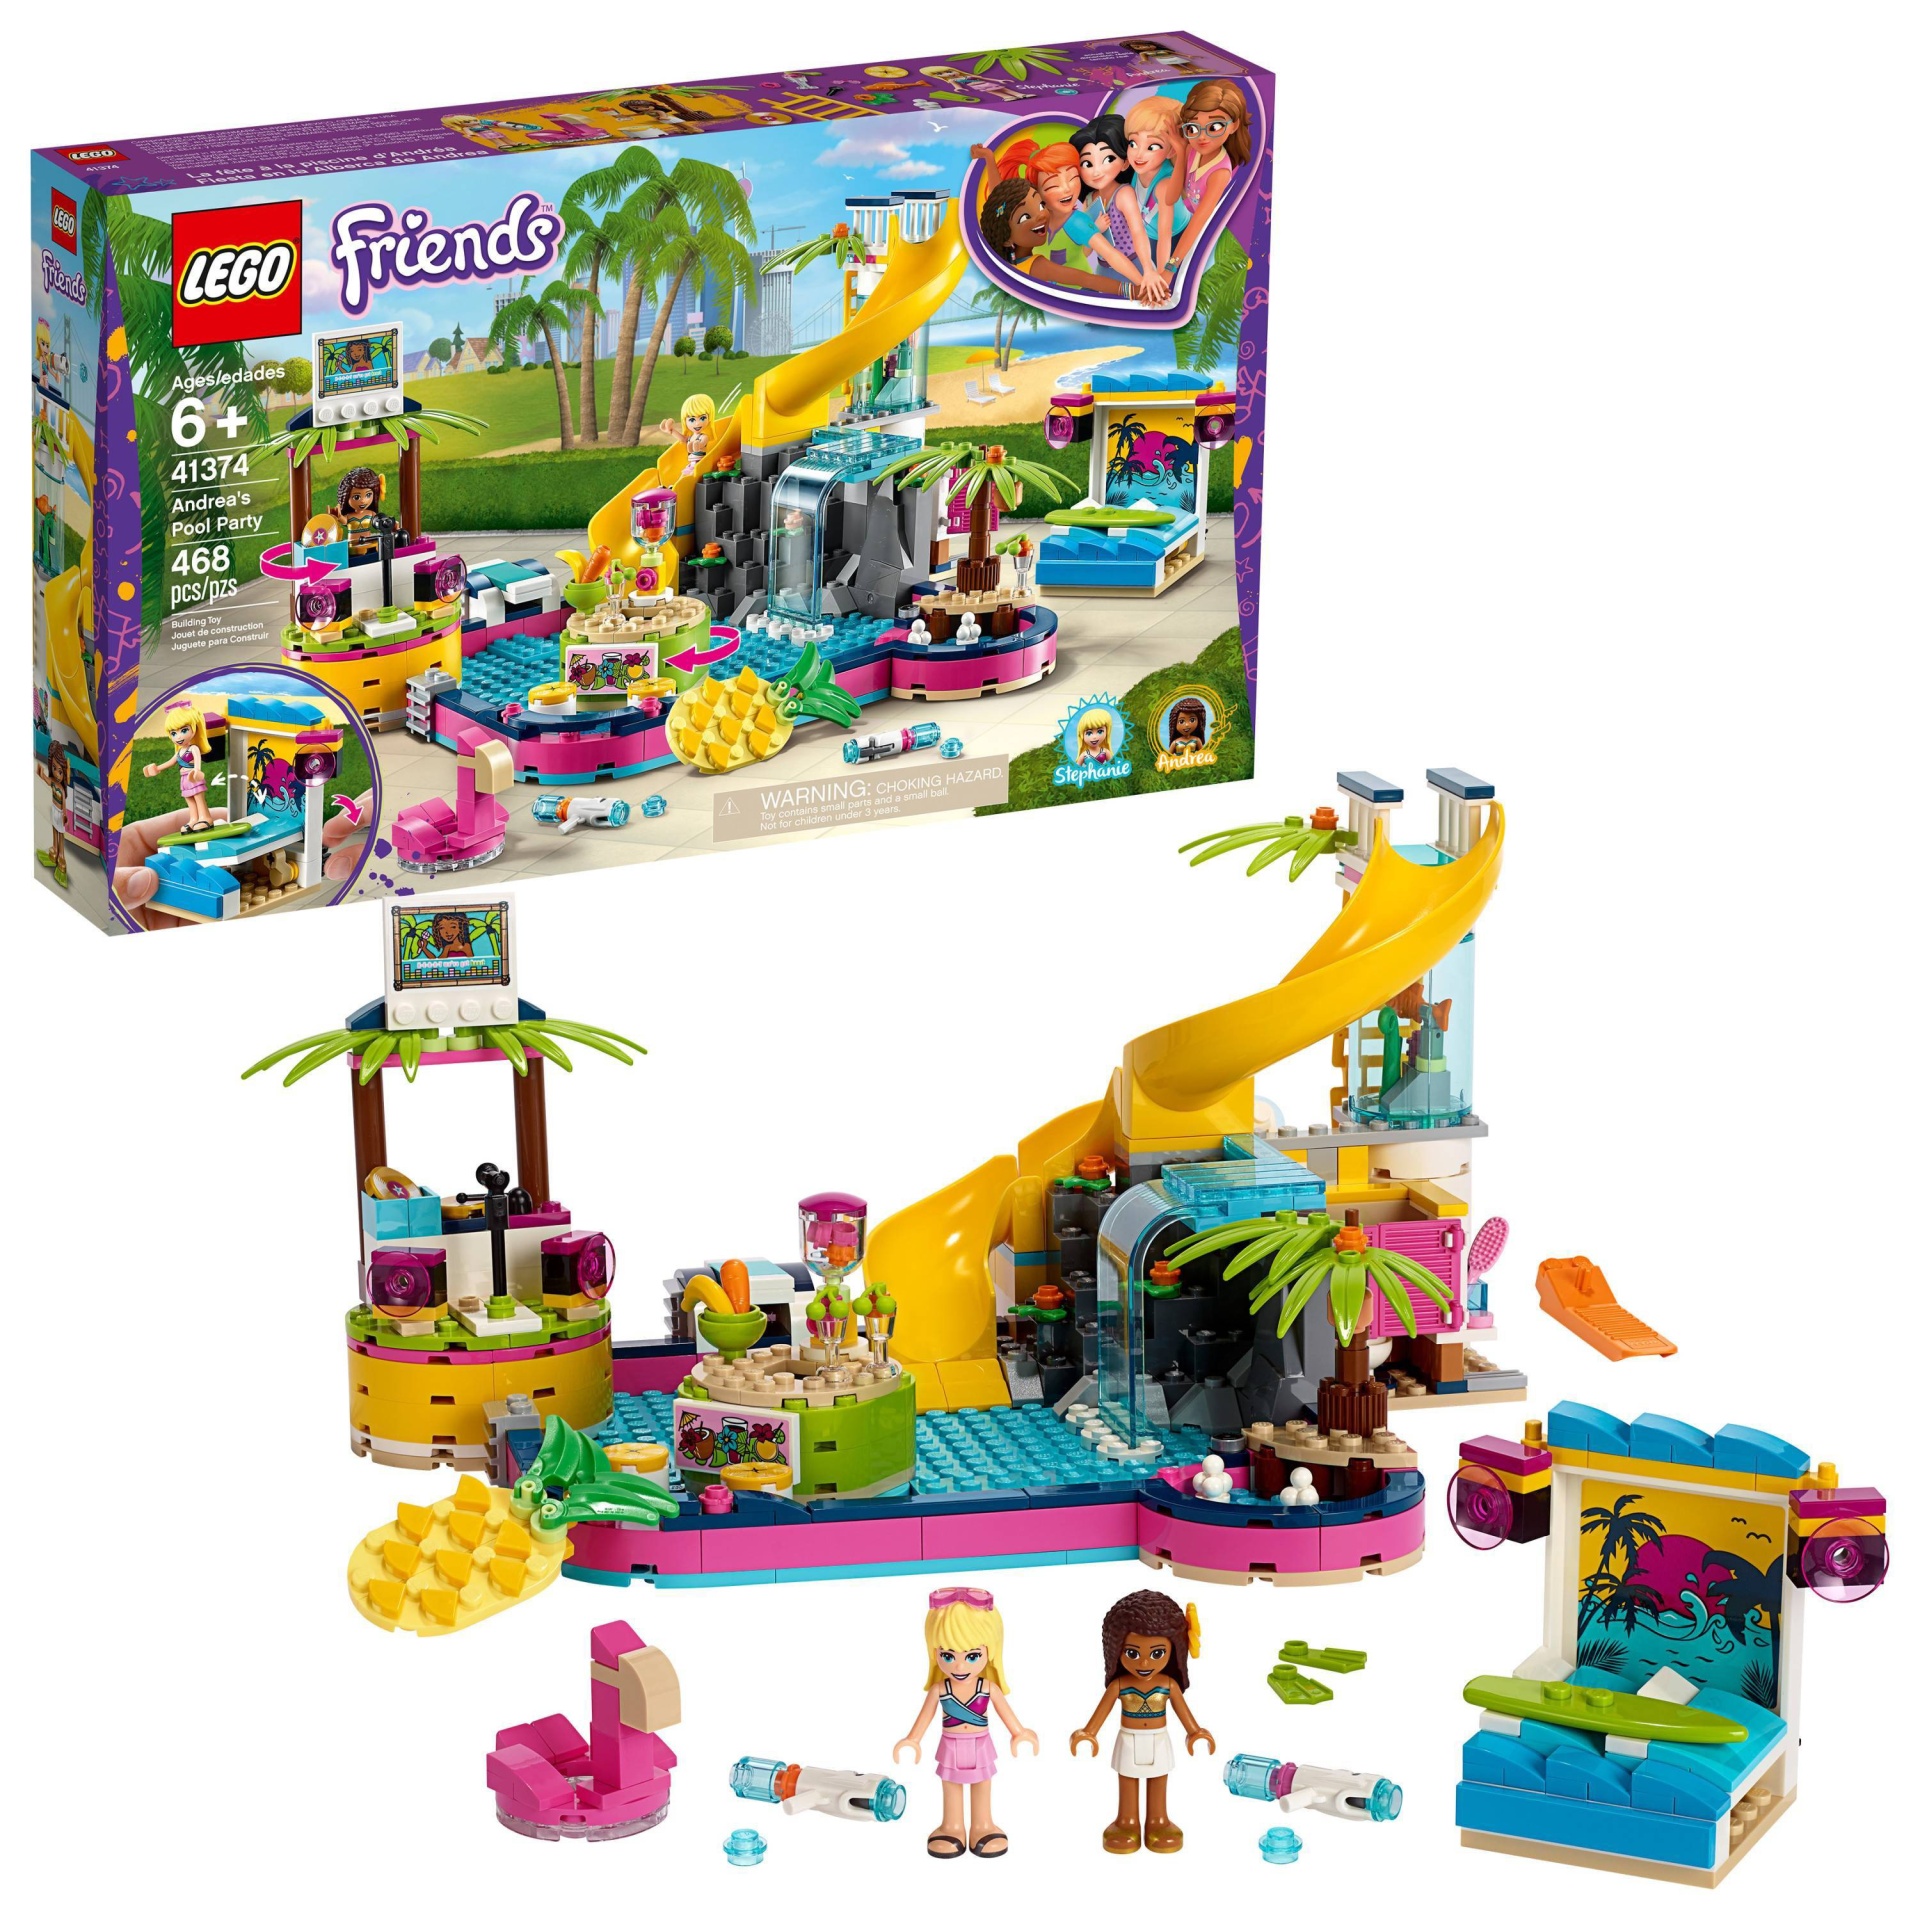 slide 1 of 1, LEGO Friends Andrea's Pool Party 41374 Toy Building Set with Mini Dolls, 1 ct